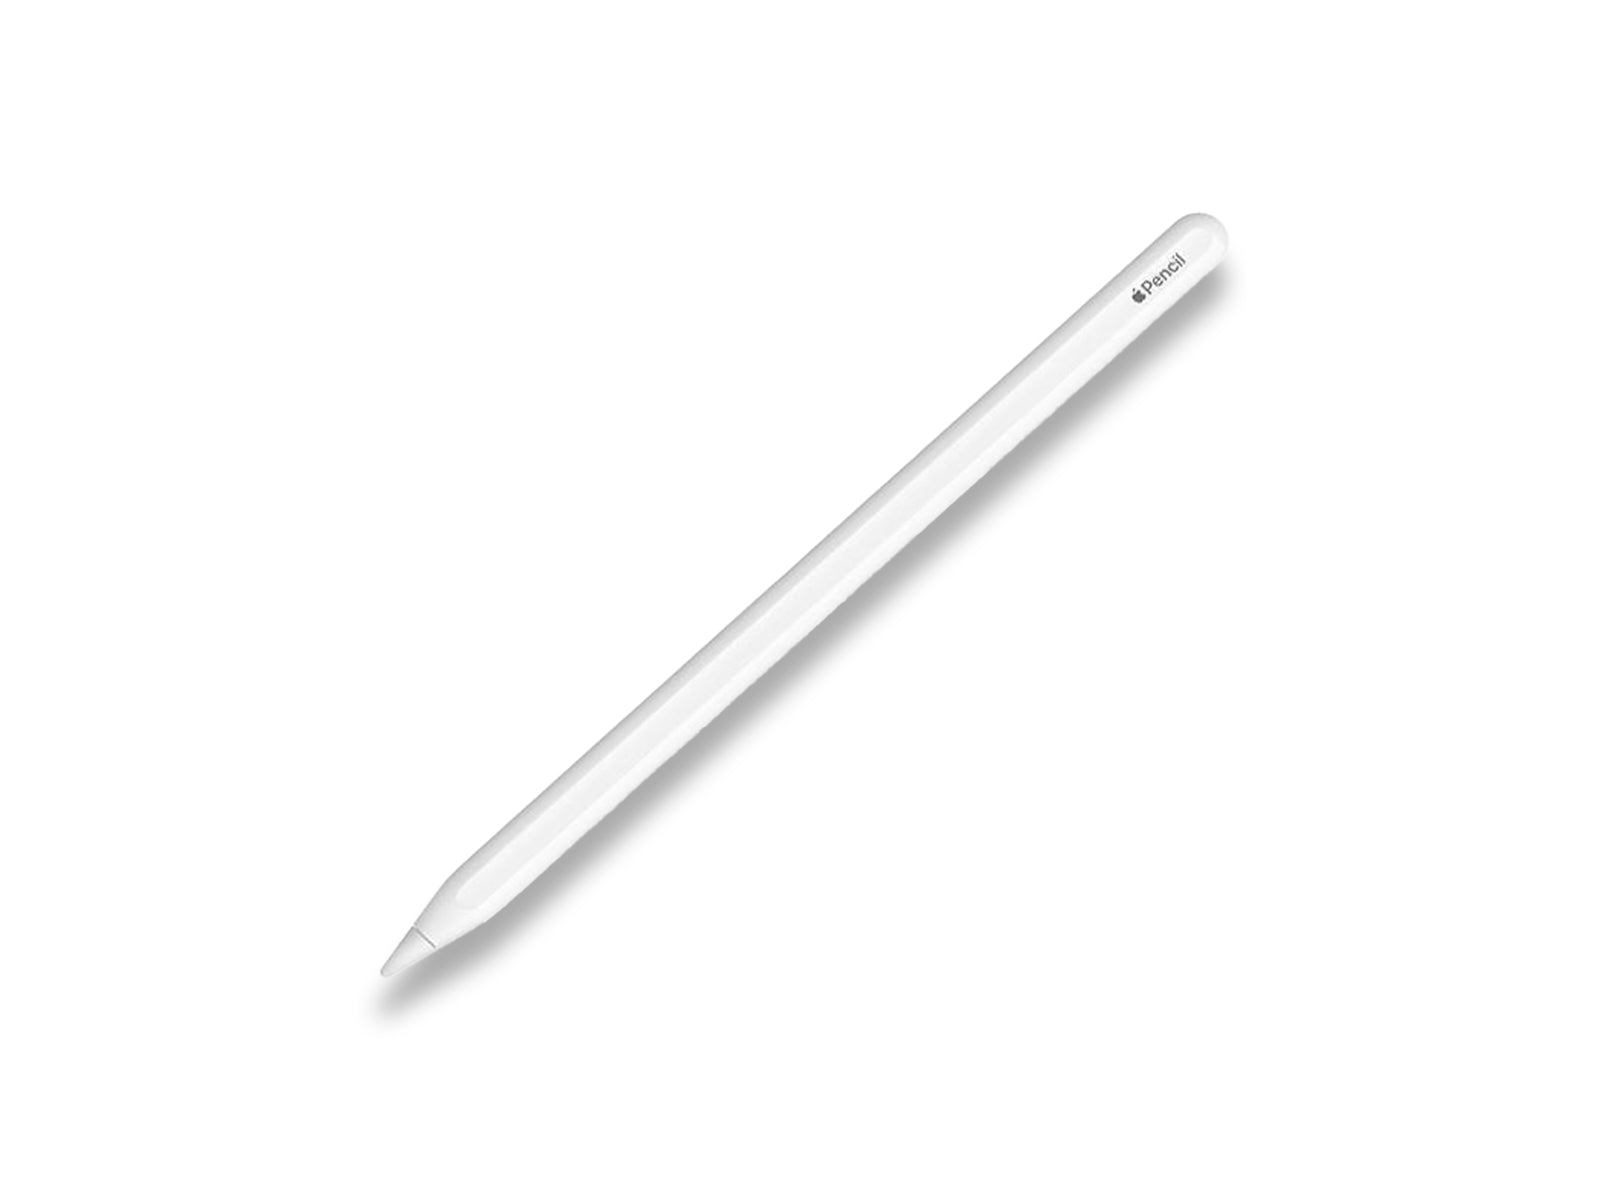  Apple Pencil 2nd Generation overhead Angled View